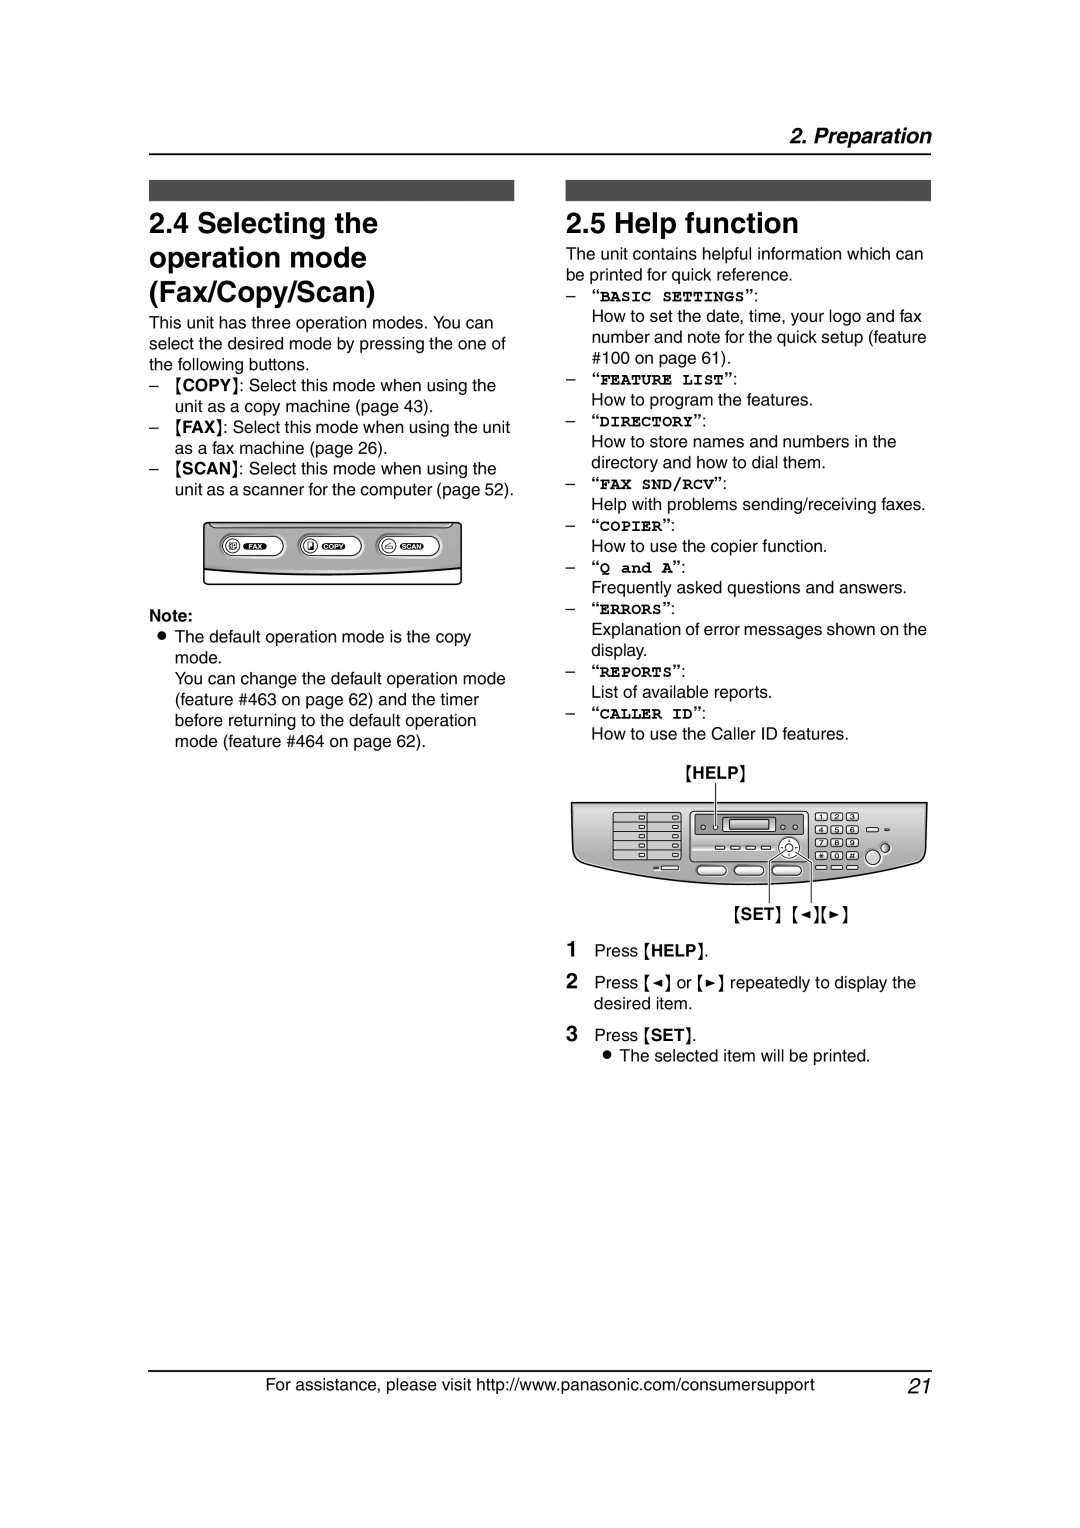 Panasonic KX-FLB851 Selecting the operation mode Fax/Copy/Scan, Help function, “Basic Settings”, “Feature List”, “Copier” 